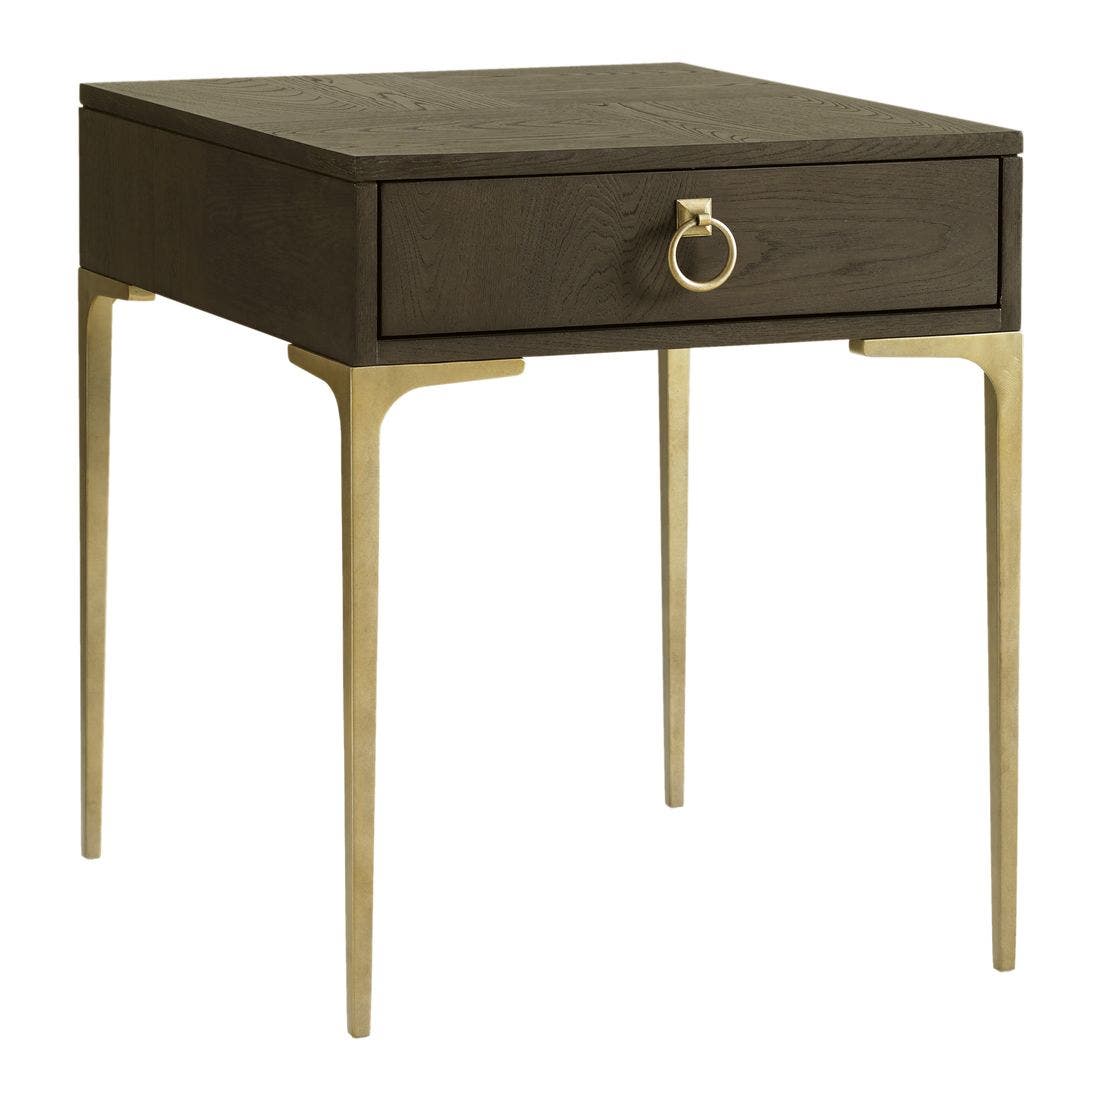 19151854-soliloquy-furniture-living-room-end-table-01